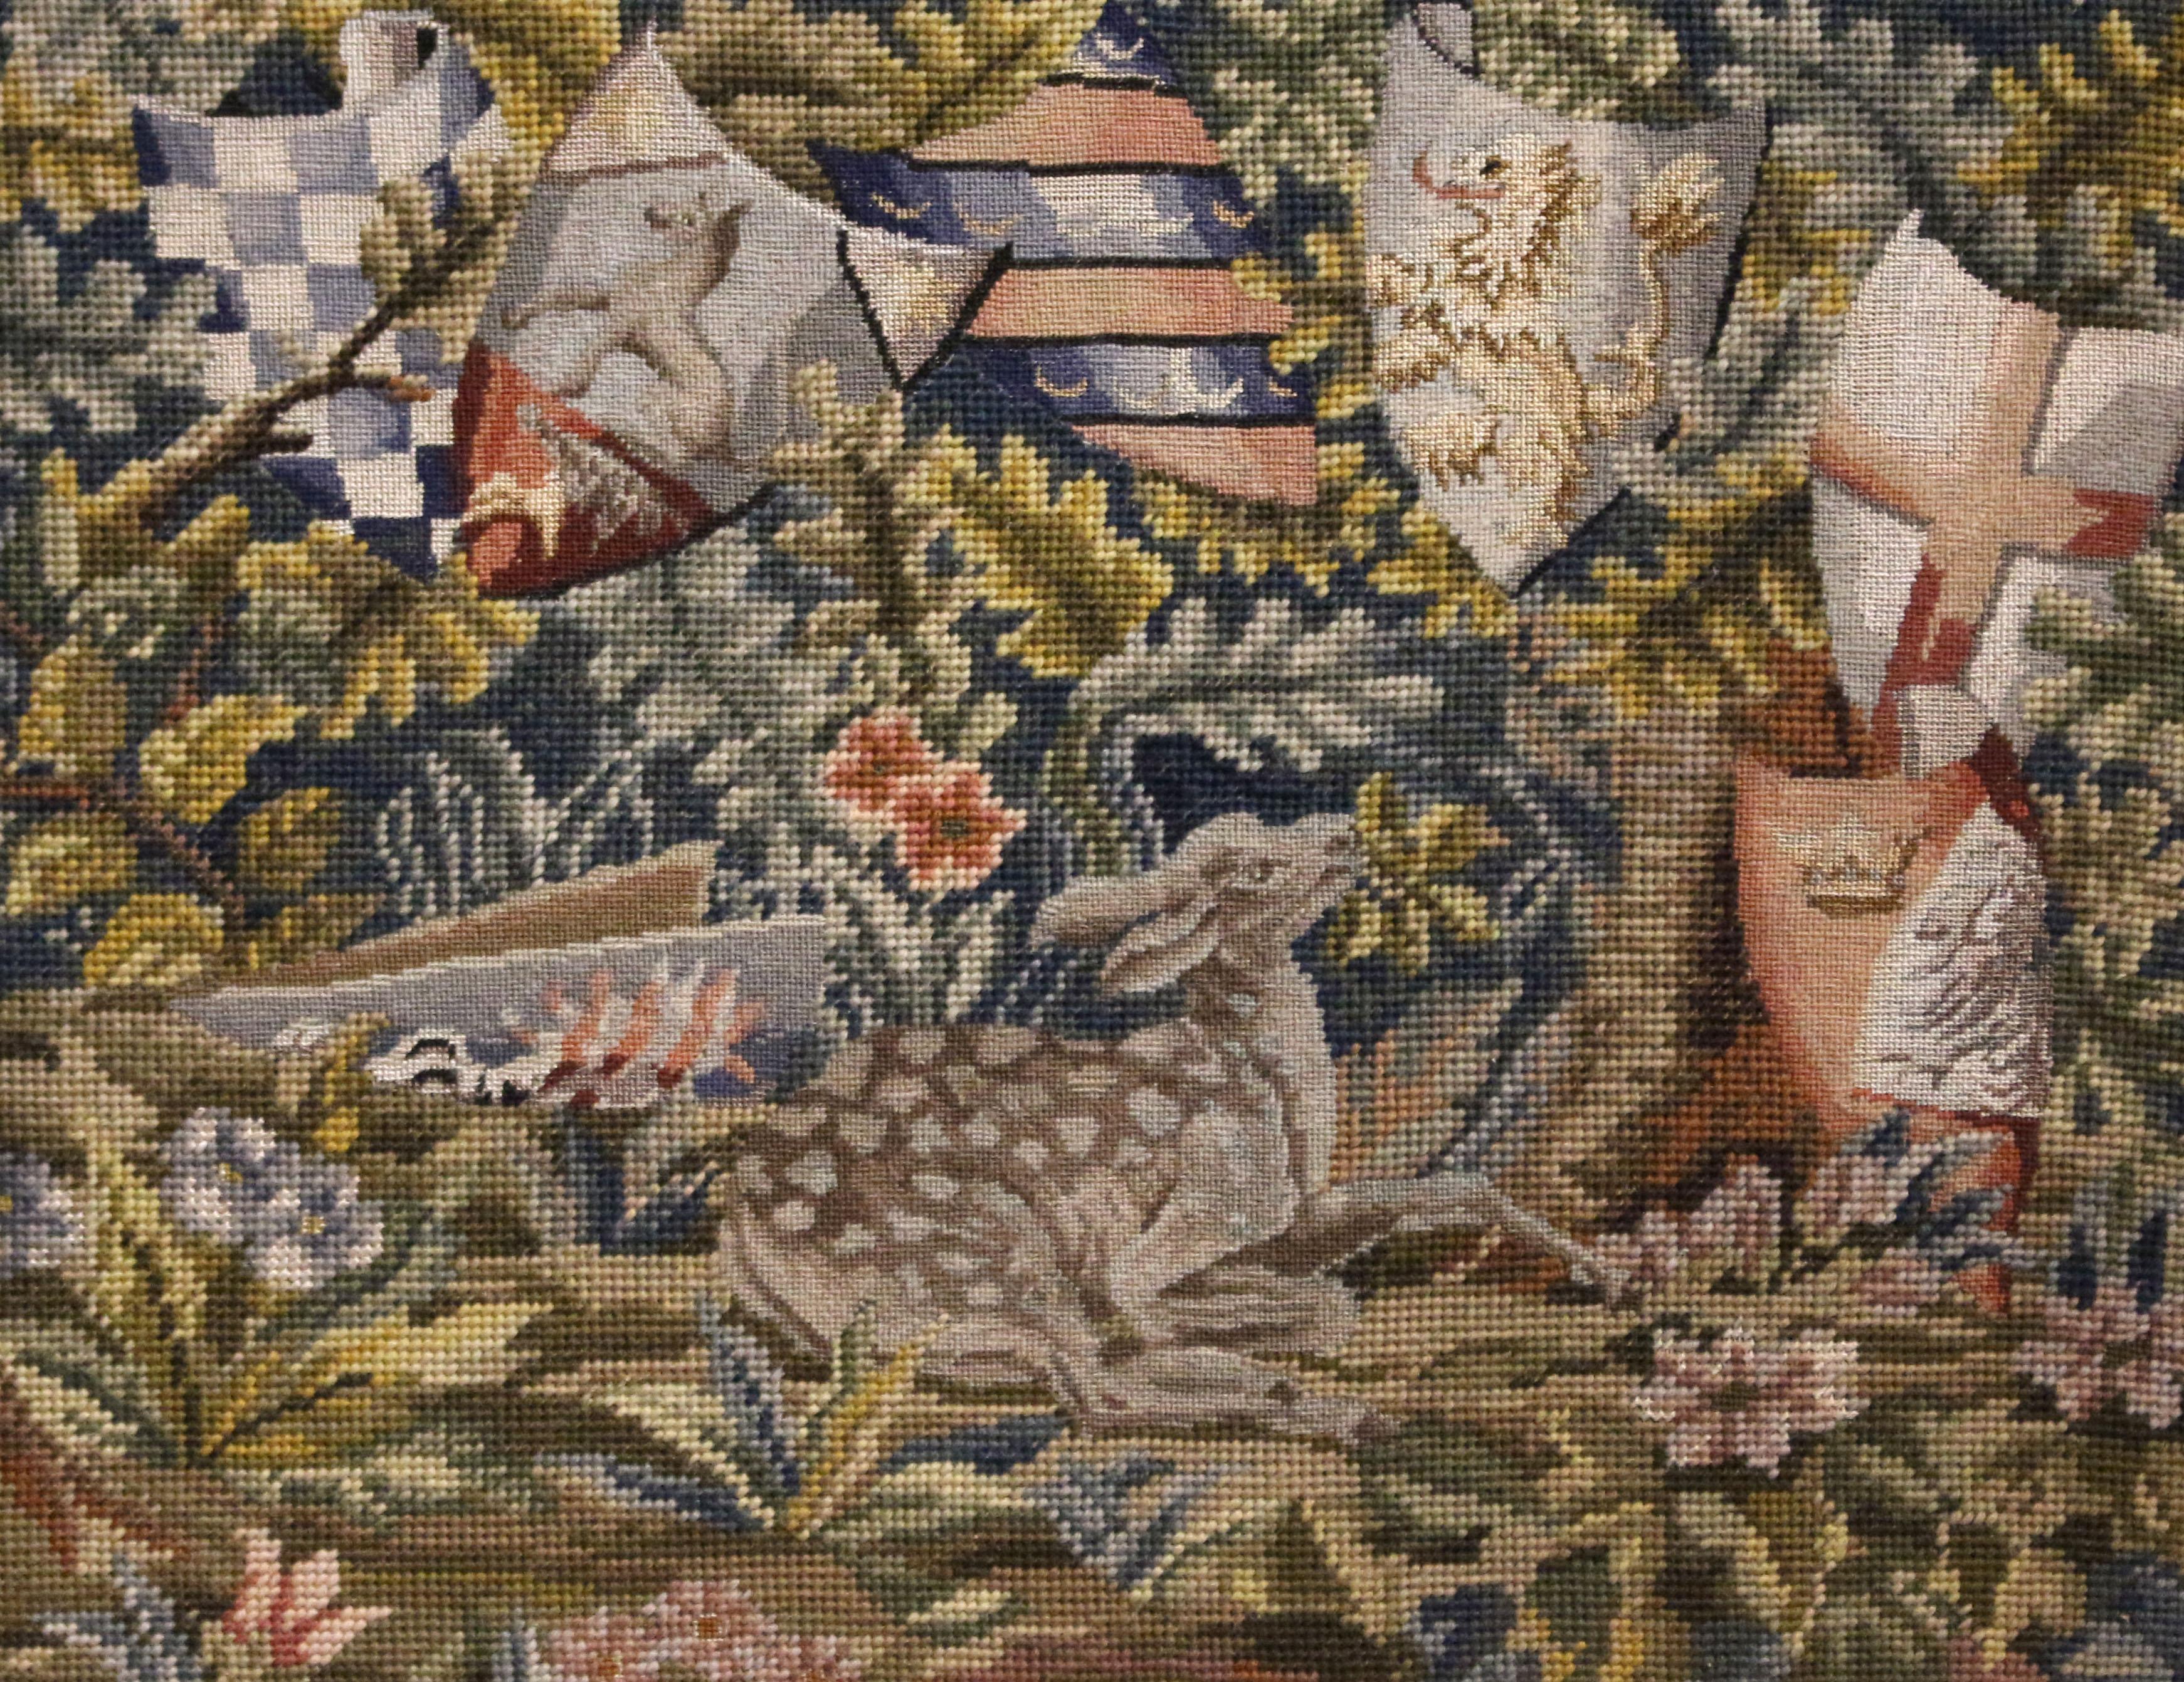 Needlepoint & pettipoint featuring shields & a deer, origin unknown. Likely a late 19th to 20th century decorative hobbiest piece. Good colors; molded gilt frame. Sight: 19.25